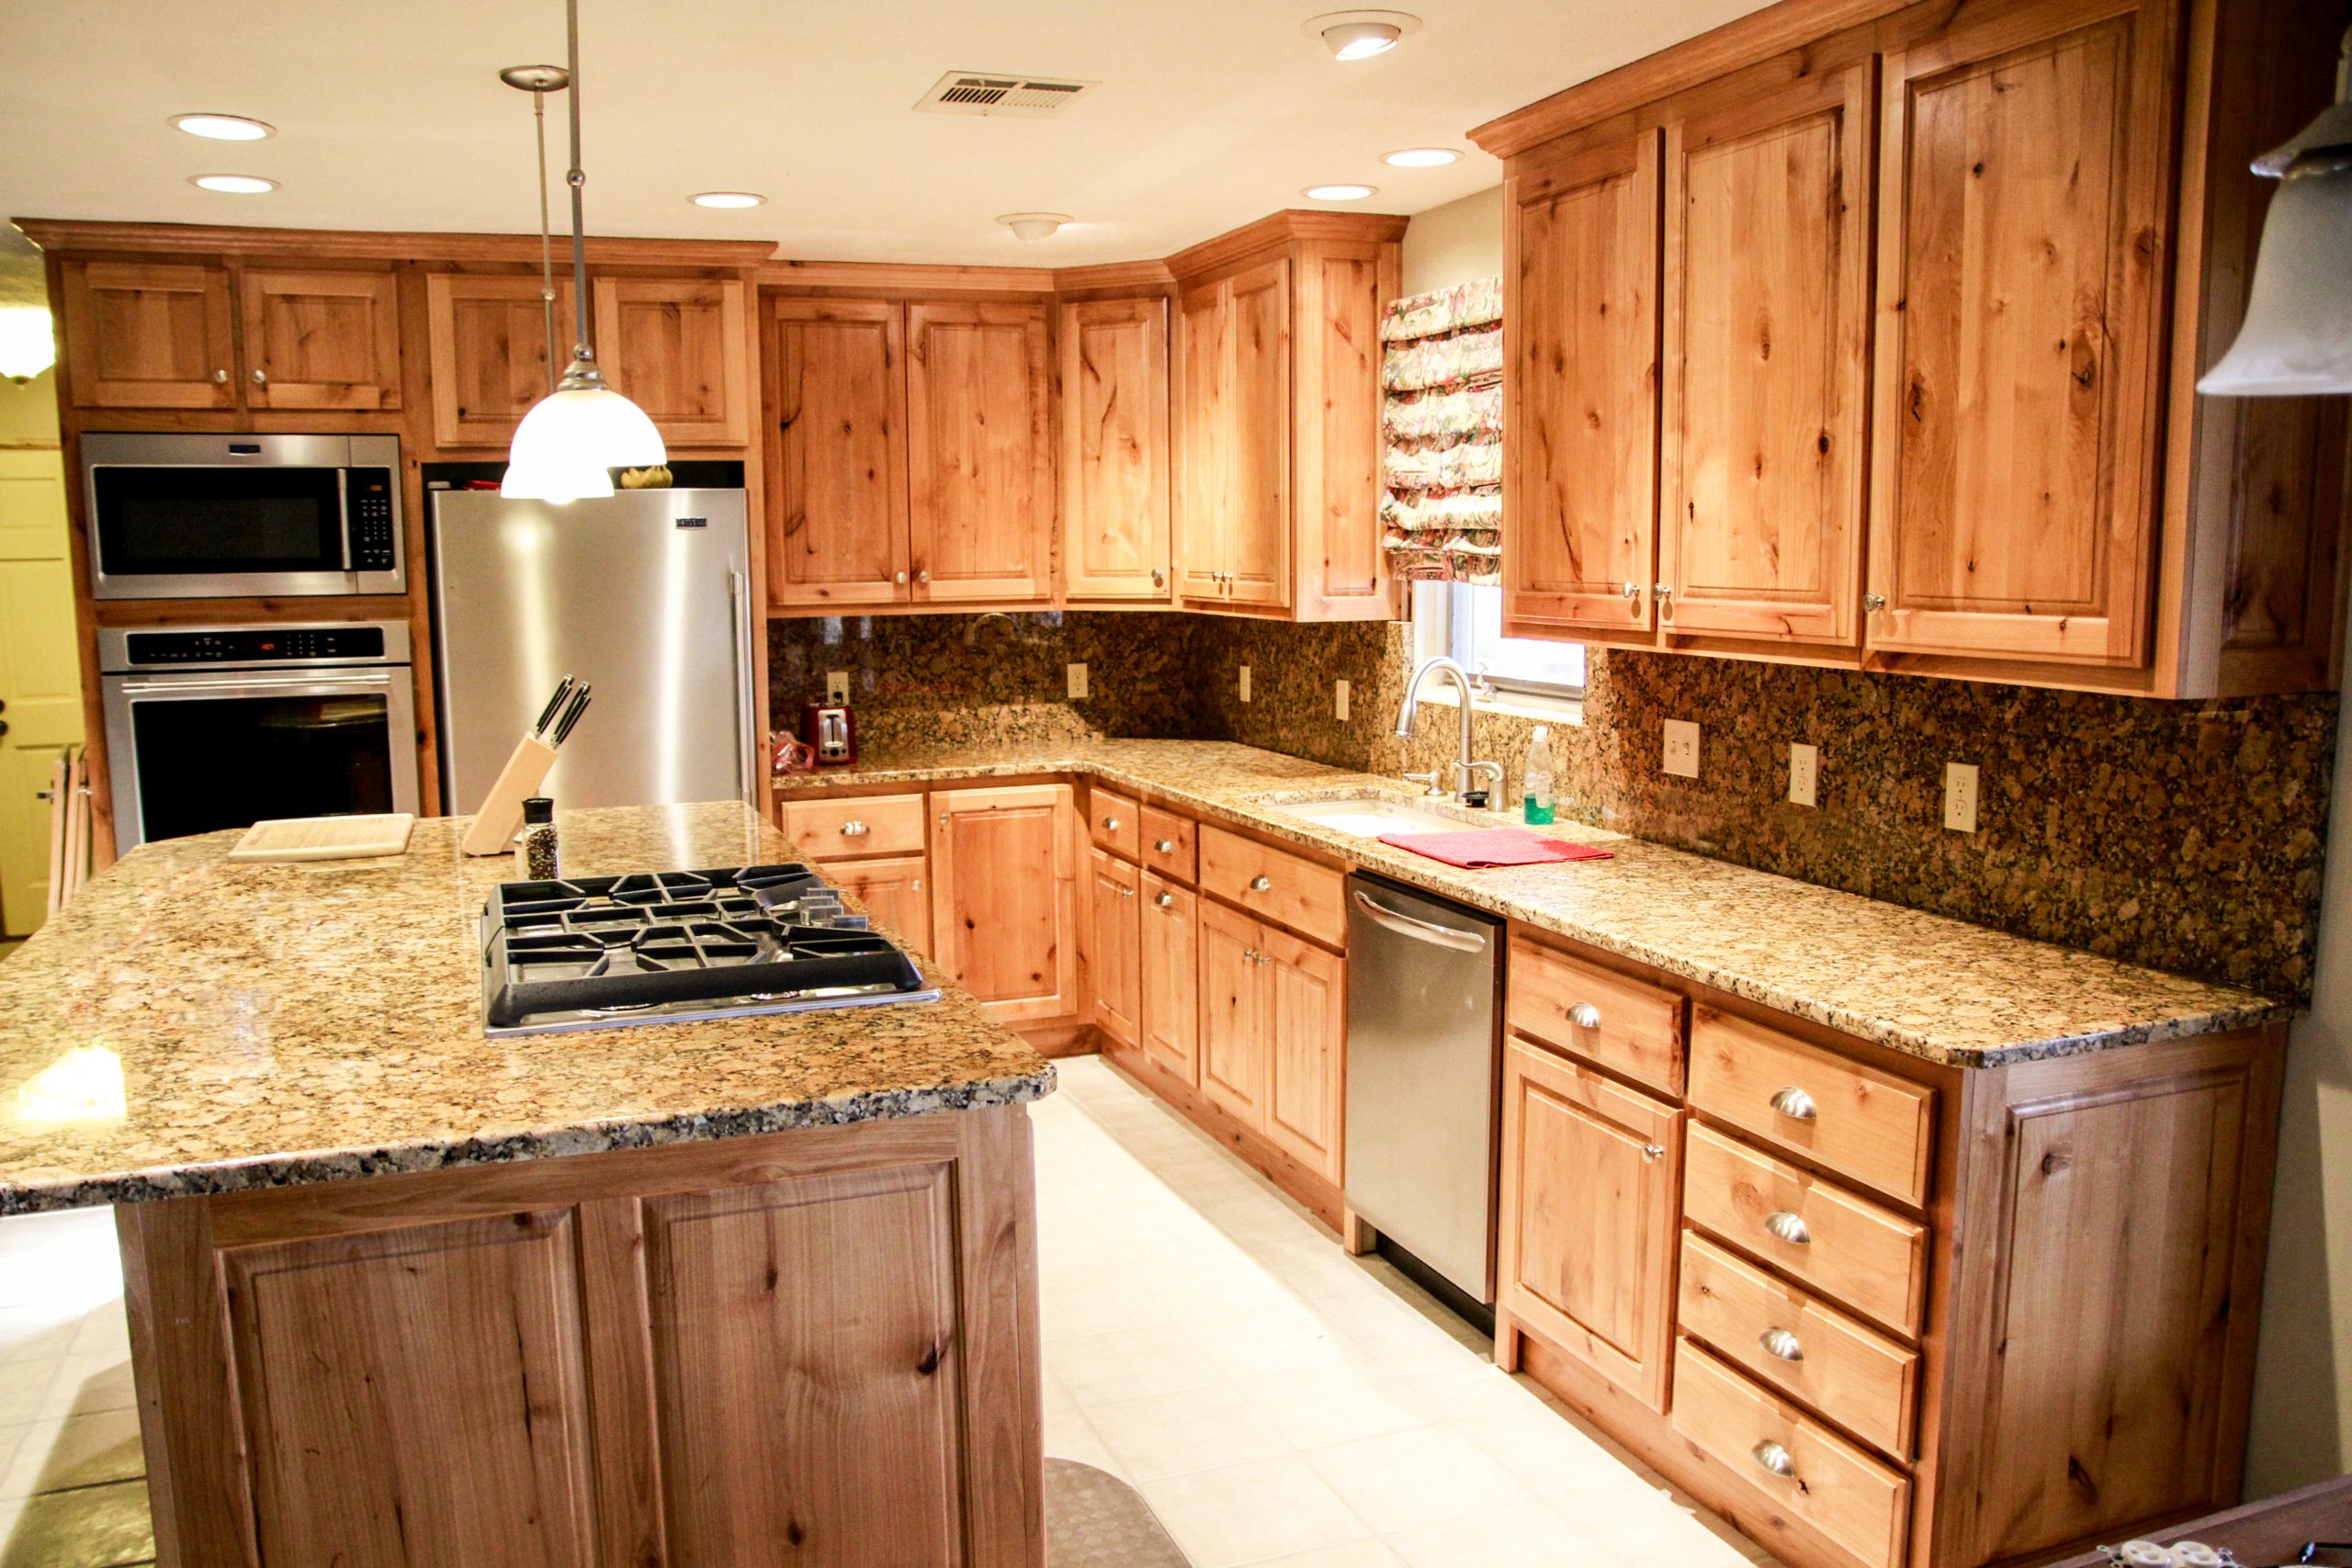 Farmhouse Kitchen Cabinets in Freehold NJ, Buy custom kitchen cabinets factory direct in Freehold NJ, Buy custom shaker cabinets factory direct in Freehold NJ